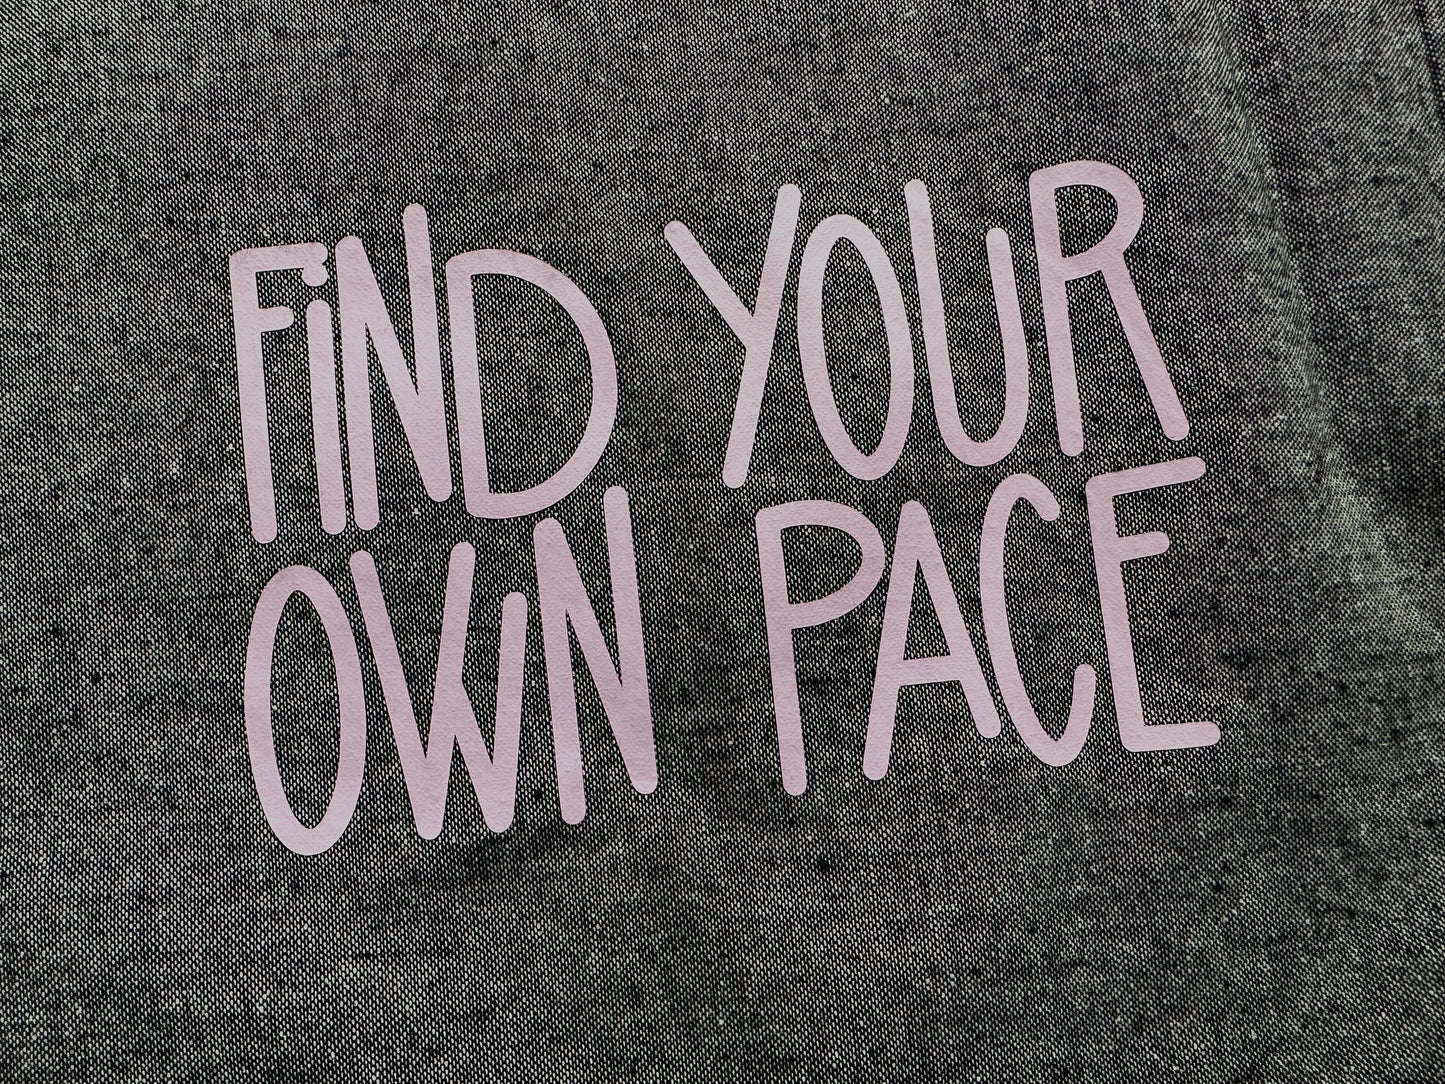 Totebag 35x25 cm - tekst: FIND YOUR OWN PACE